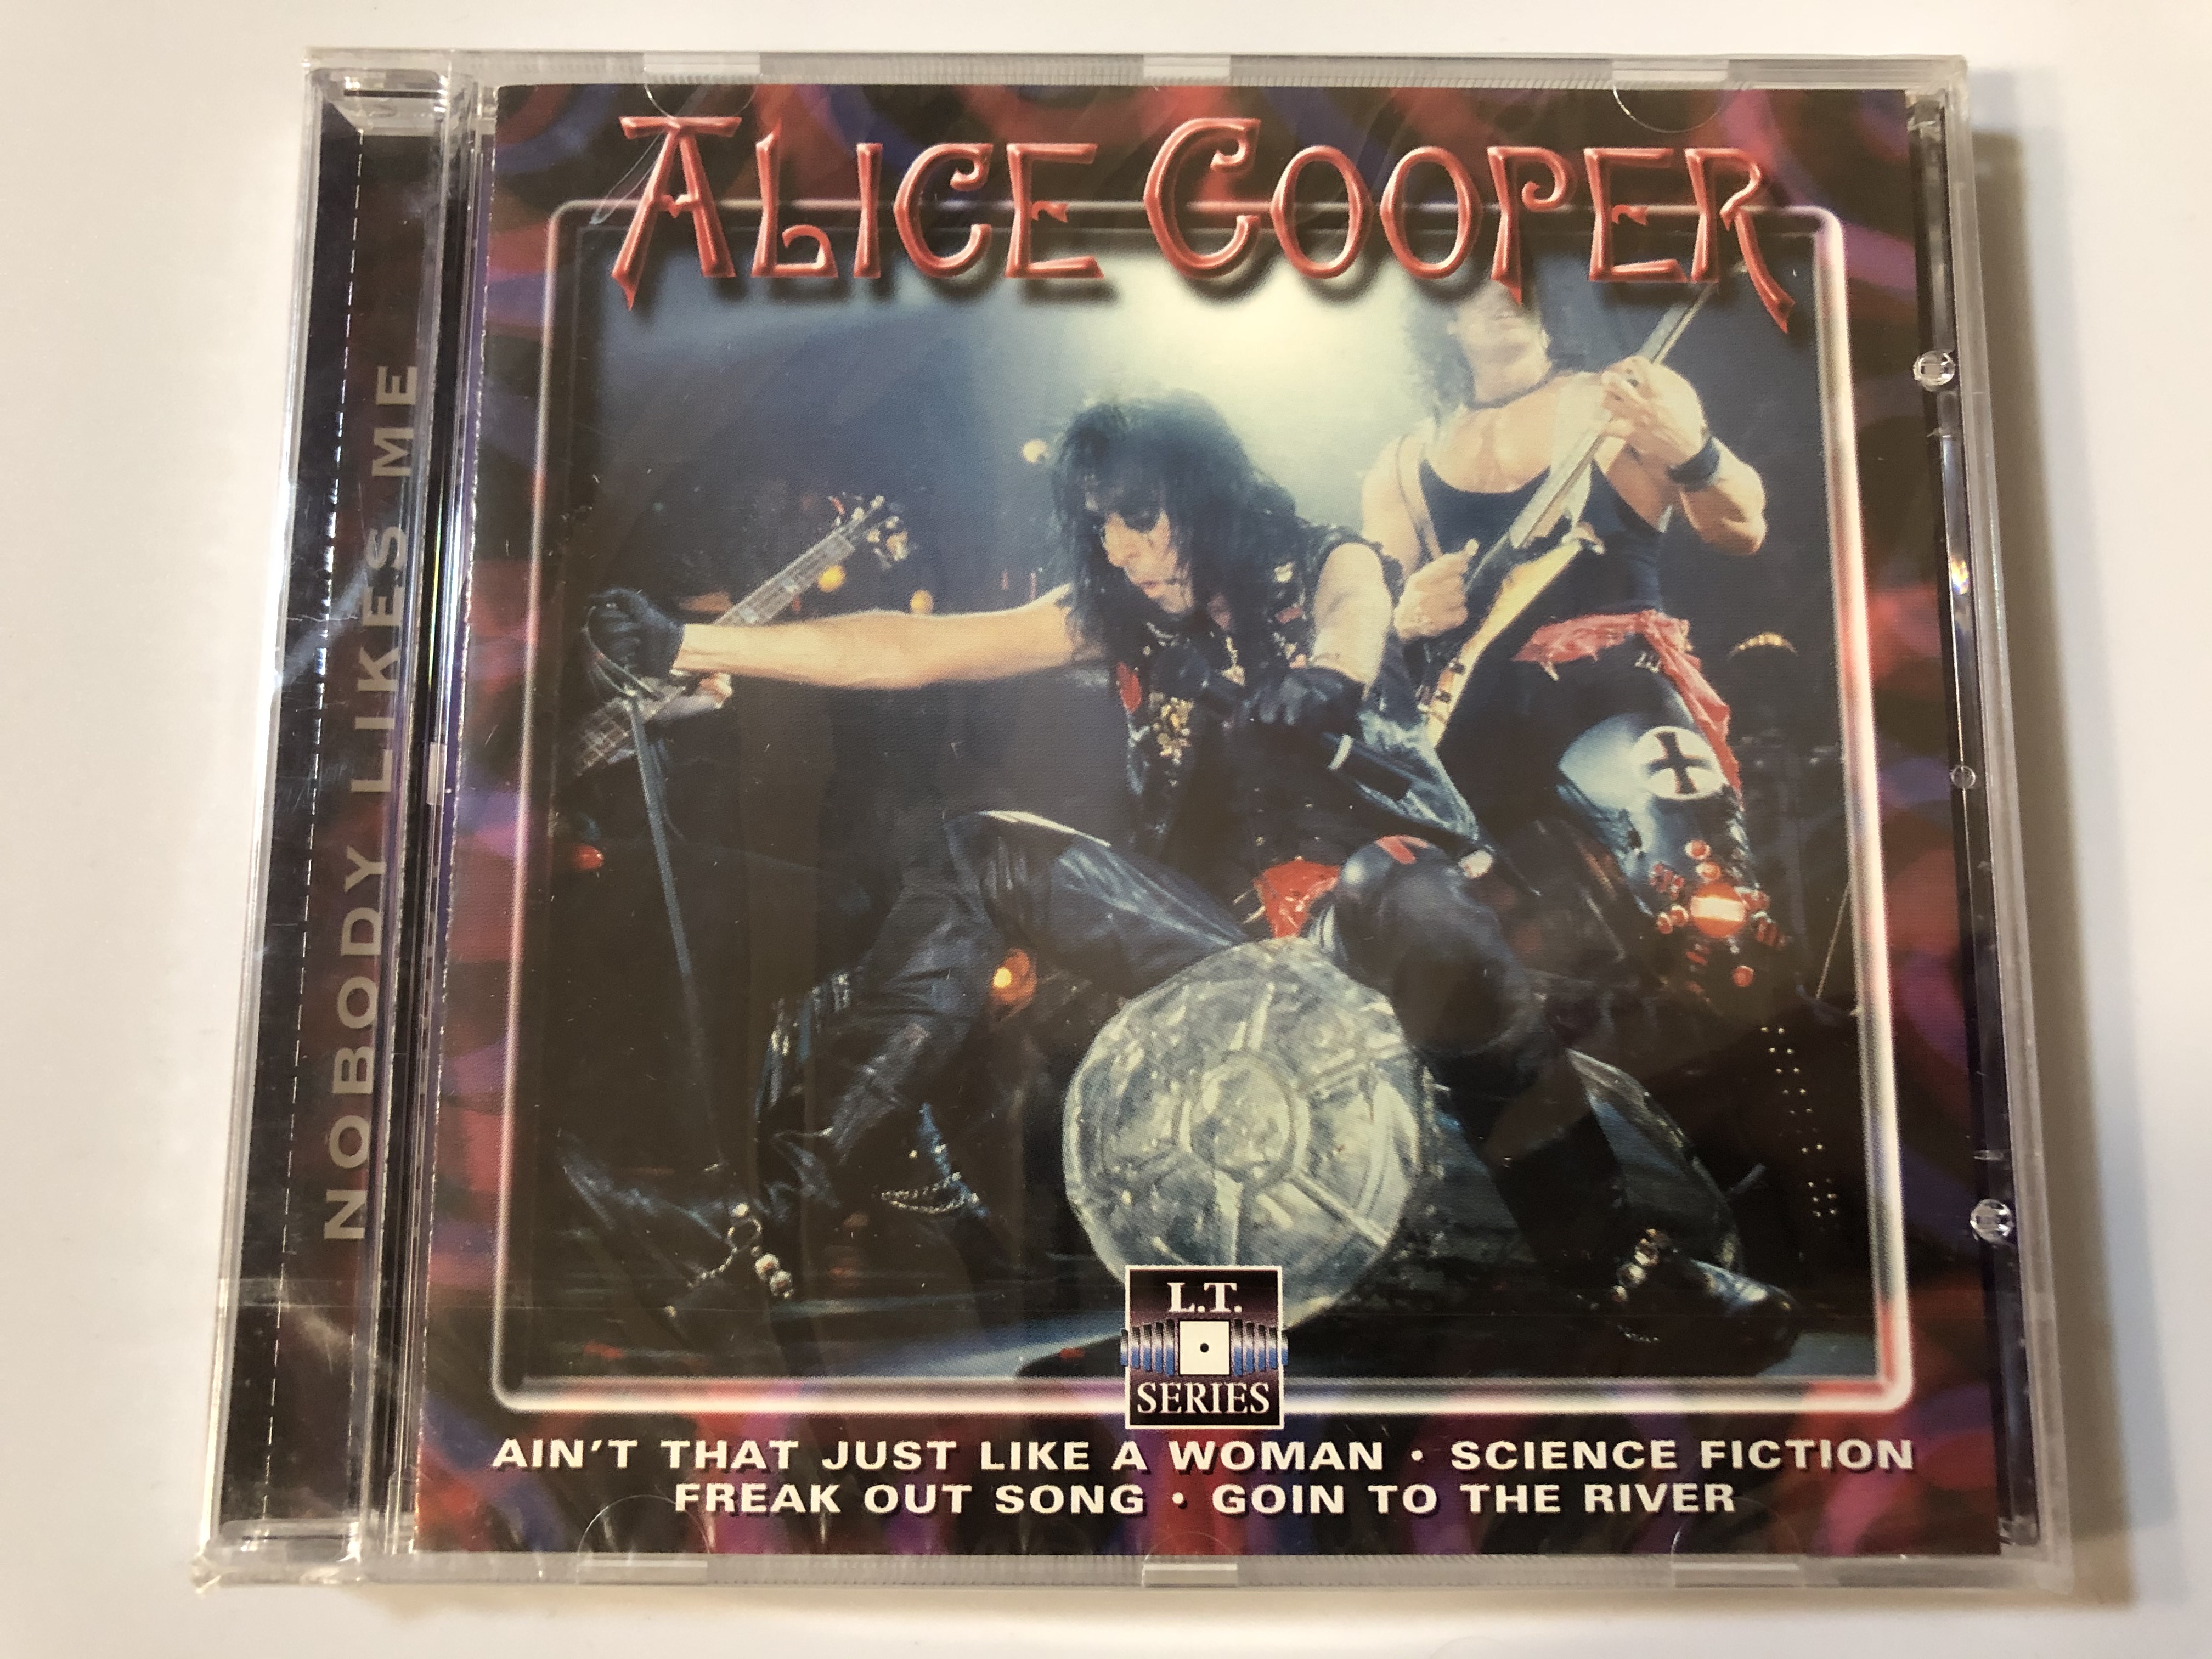 alice-cooper-nobody-likes-me-ain-t-that-just-like-a-woman-science-fiction-freak-out-song-goin-to-the-river-life-time-audio-cd-lt-5034-1-.jpg